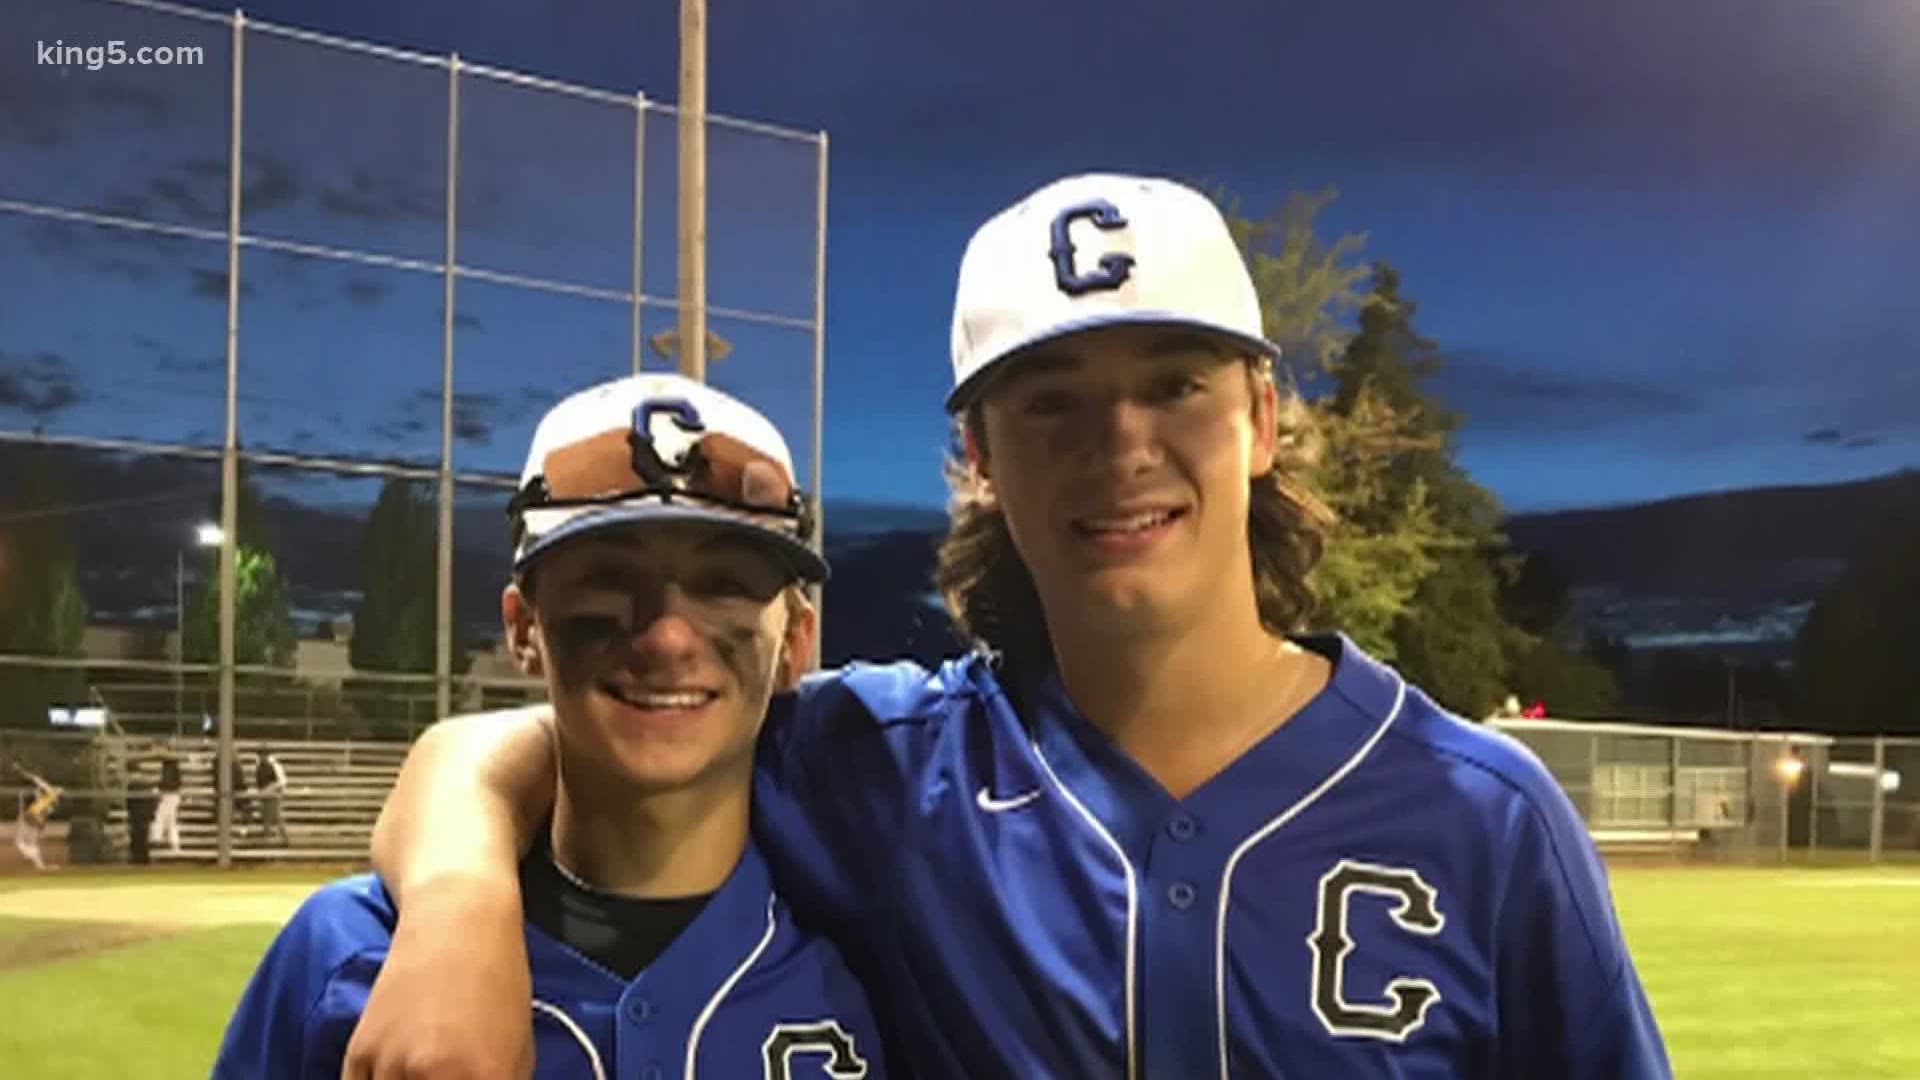 In this week's Prep Zone, a Curtis H.S. senior is excited for a chance at the MLB, but really looks forward to being a Coug and playing again with his brother.